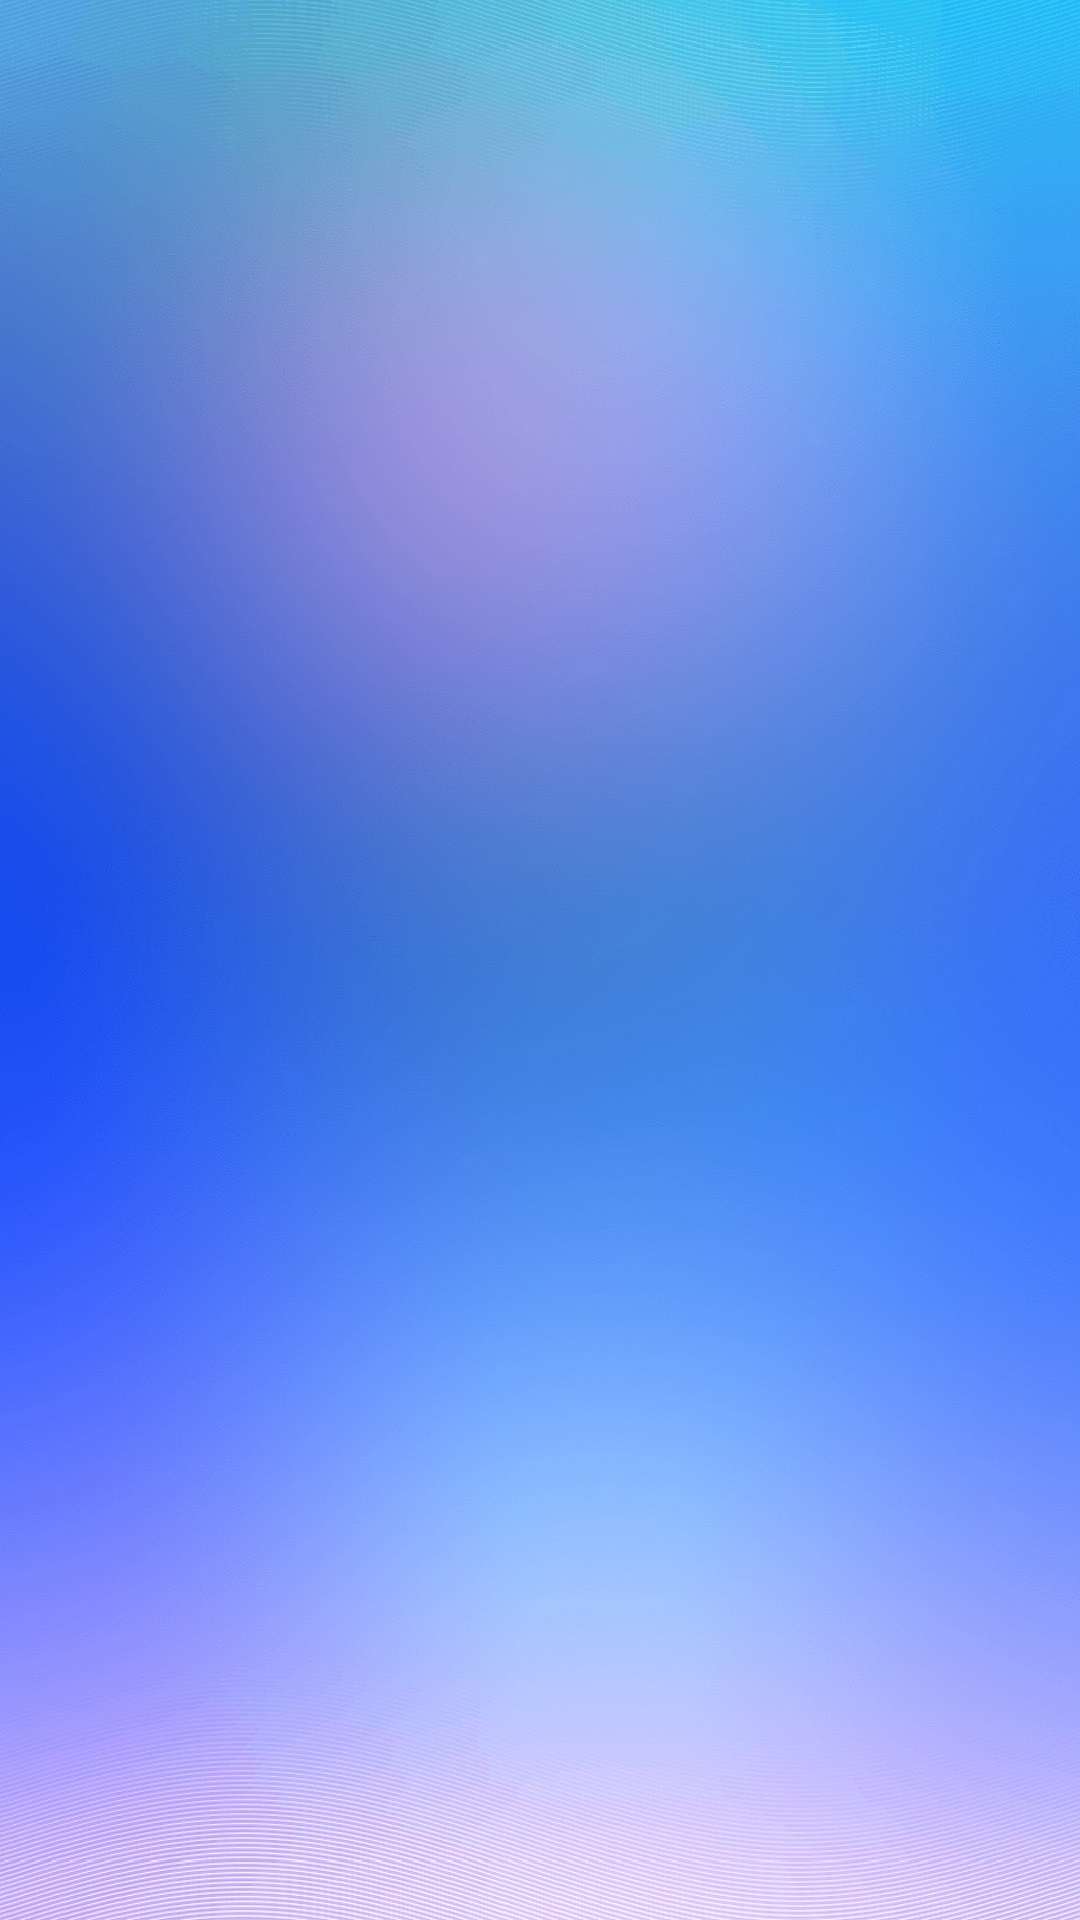 Gradient Wallpaper iPhone with high-resolution 1080x1920 pixel. You can use this wallpaper for your iPhone 5, 6, 7, 8, X, XS, XR backgrounds, Mobile Screensaver, or iPad Lock Screen